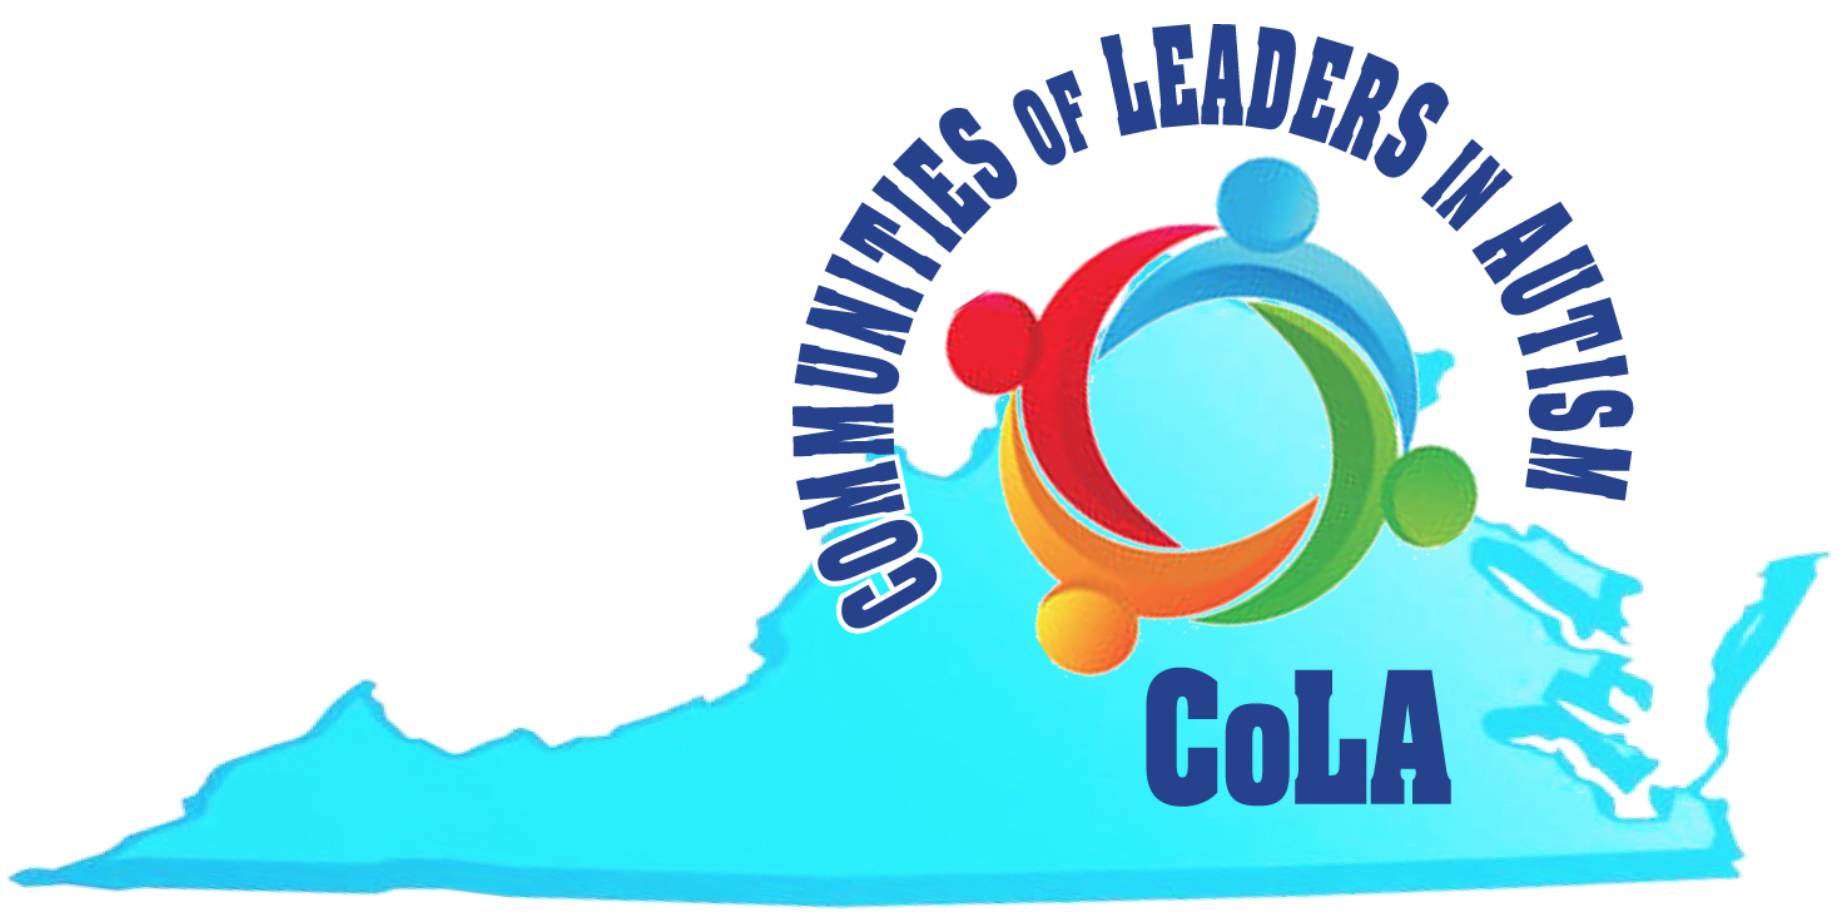 COLA Logo - Shape of Virginia with the letters C-o-L-A written over the shape, along with "Communities of Leaders in Autism